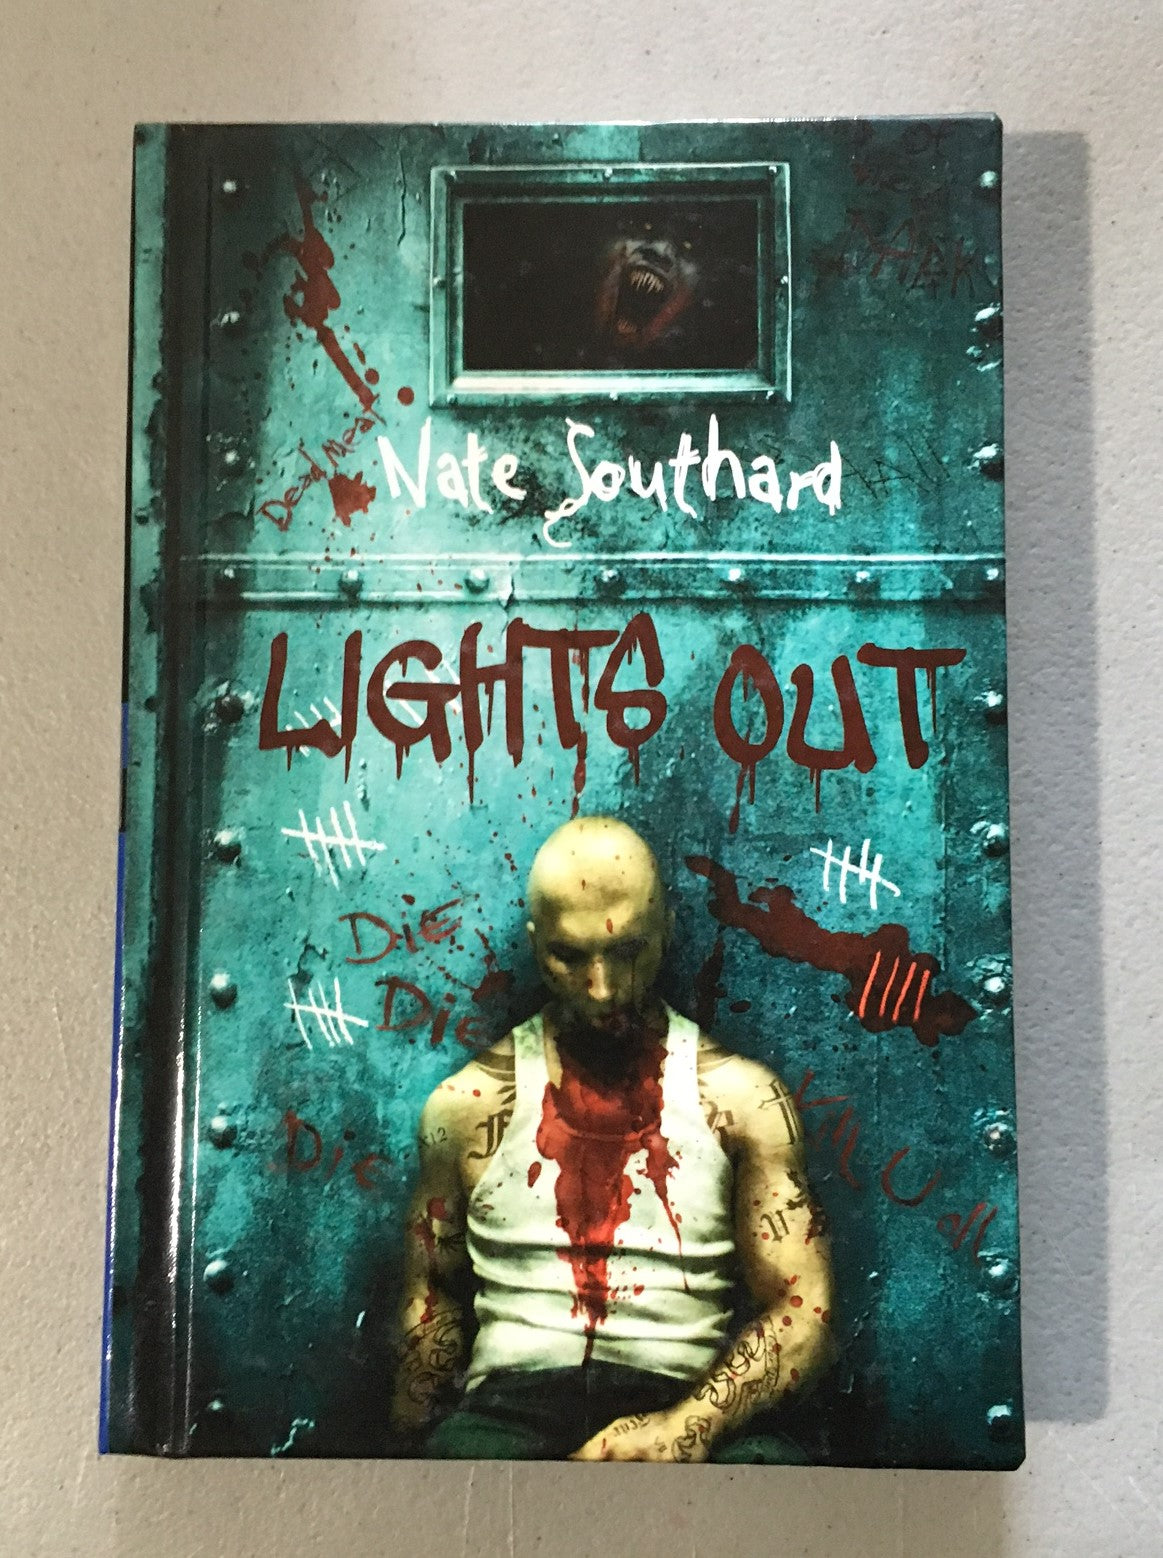 Lights Out by Nate Southard (Rare signed limited HC - Thunderstorm)